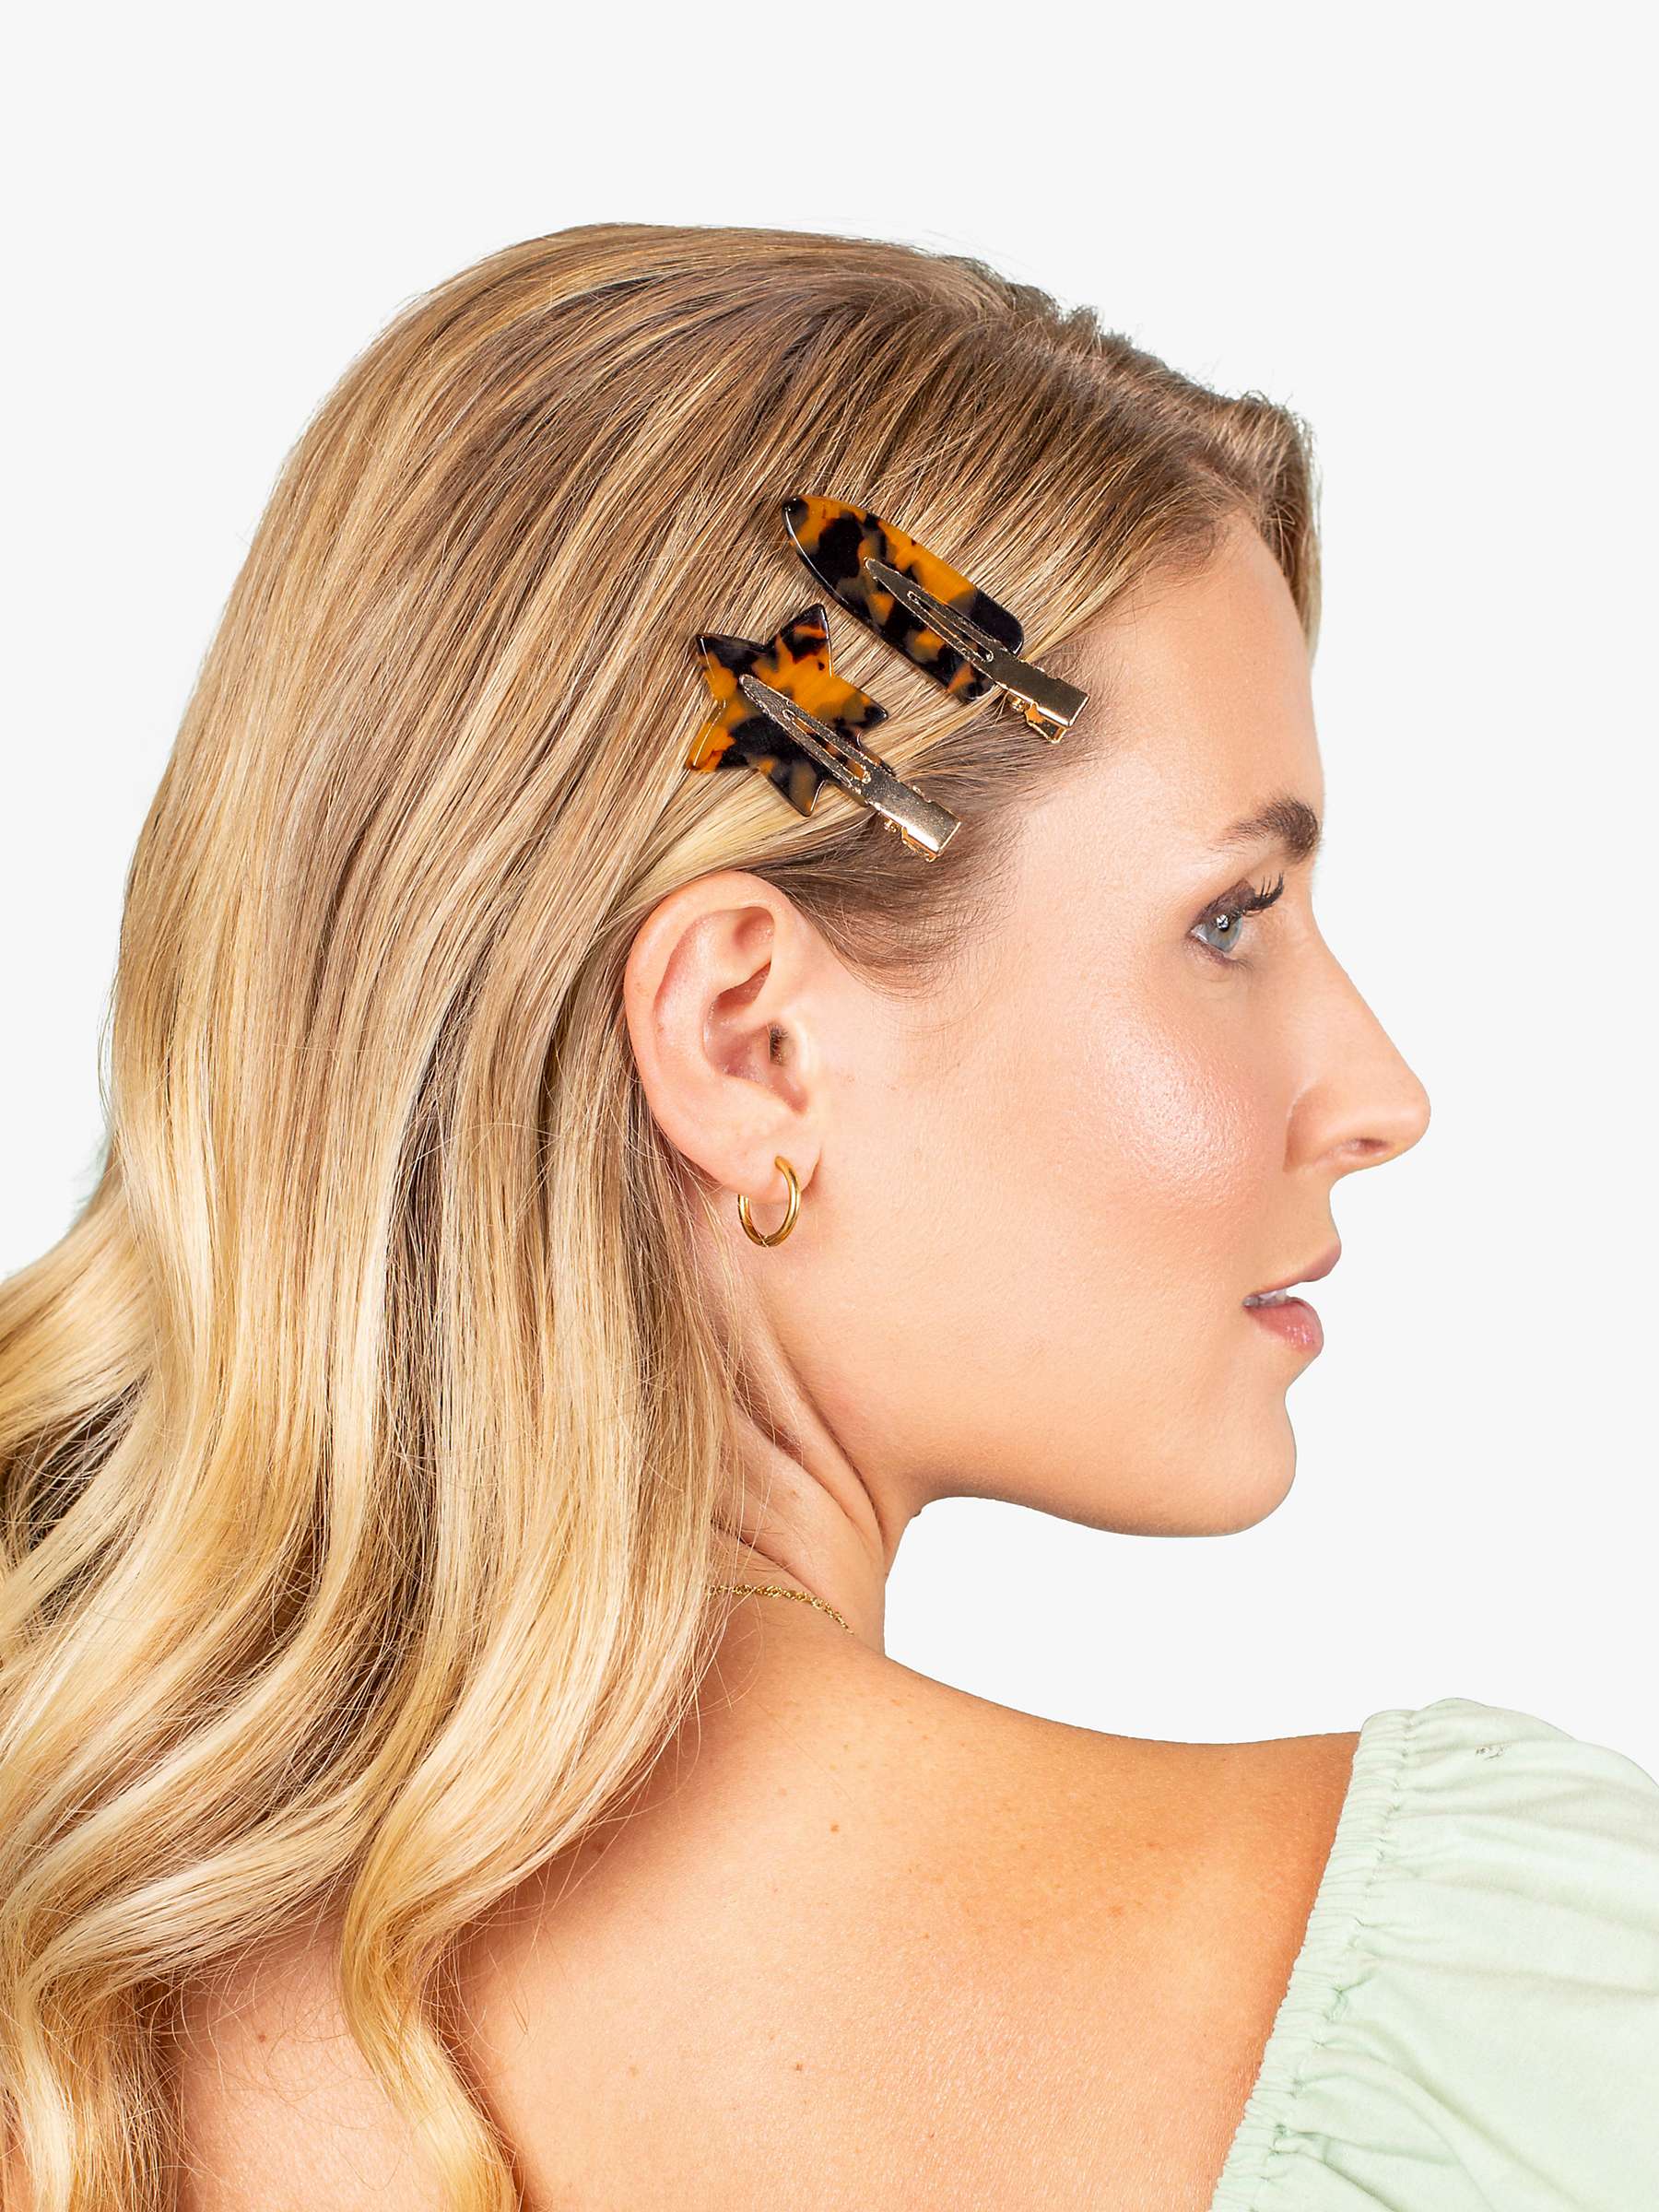 Buy Bloom & Bay Tulip Flat Tortoiseshell Hair Clips, Pack of 4, Brown/Gold Online at johnlewis.com